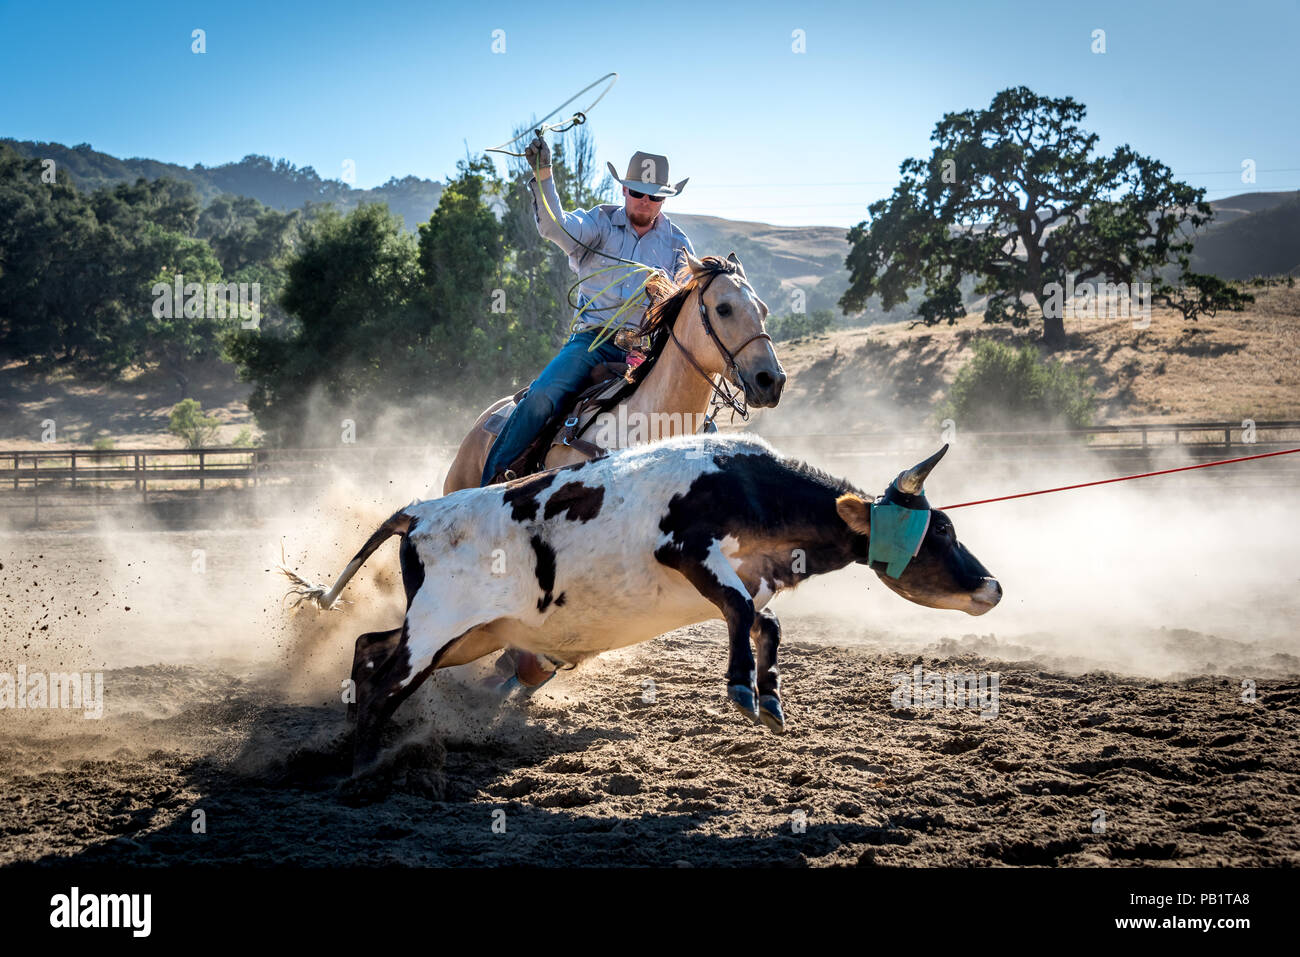 Cowboy roping young steer on horseback, sun shining through dust, oak tree in background. Lasso in air with one rope around calf Stock Photo